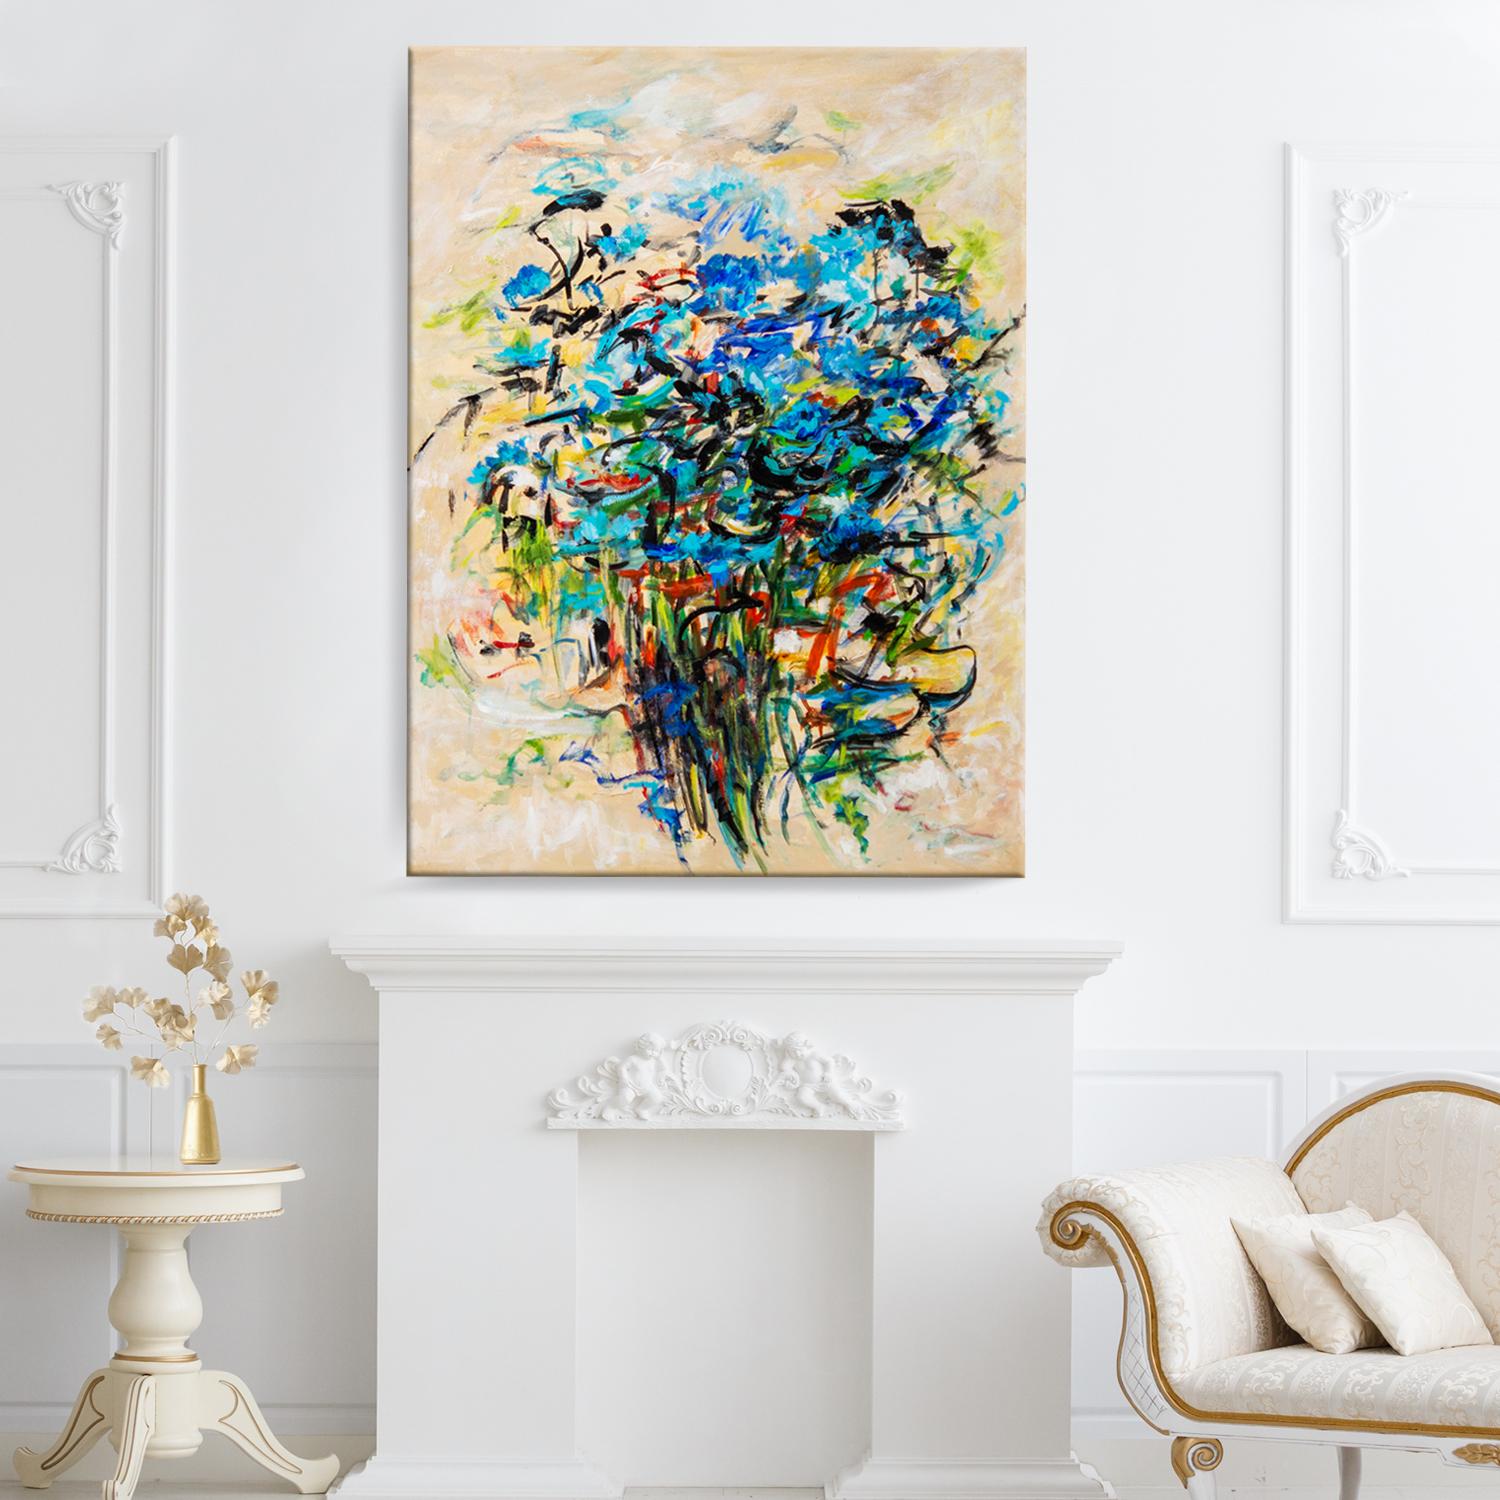 'Blues Boutique' Wrapped Canvas Original Painting features vibrant tones of blue, green, yellow, and brown on a neutral beige background. Modern divinity expressed on canvas, Karen H. Salup’s work exhibits a multitude of textures enveloped in a